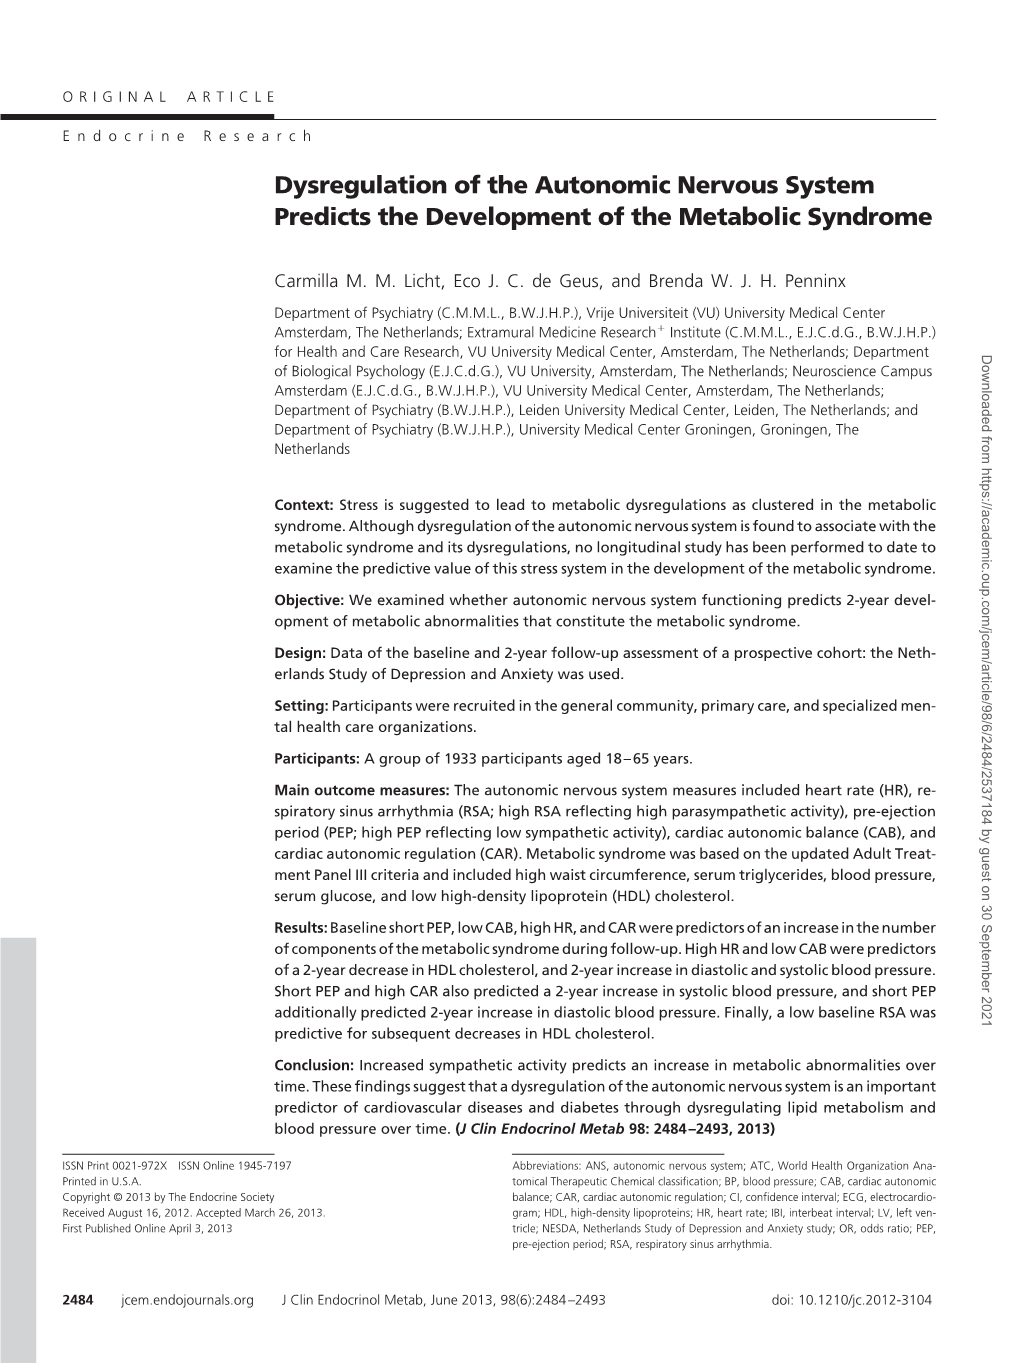 Dysregulation of the Autonomic Nervous System Predicts the Development of the Metabolic Syndrome